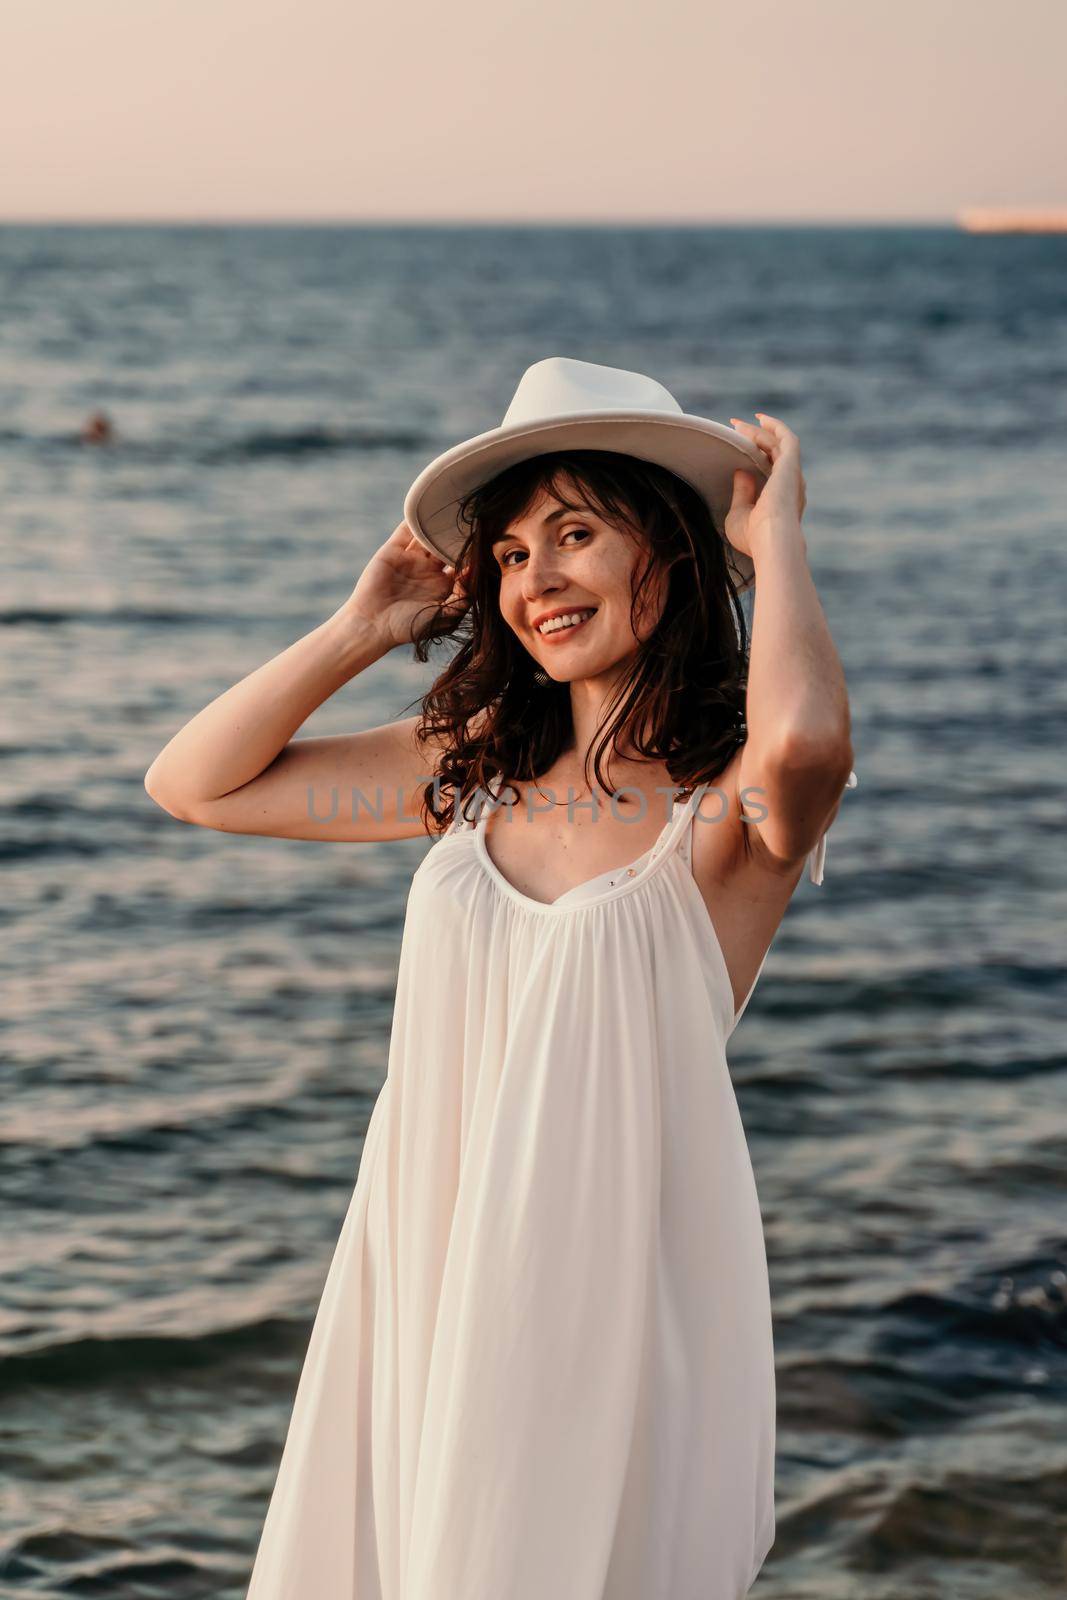 A woman in a white dress and hat is standing on the beach enjoying the sea. Happy summer holidays.